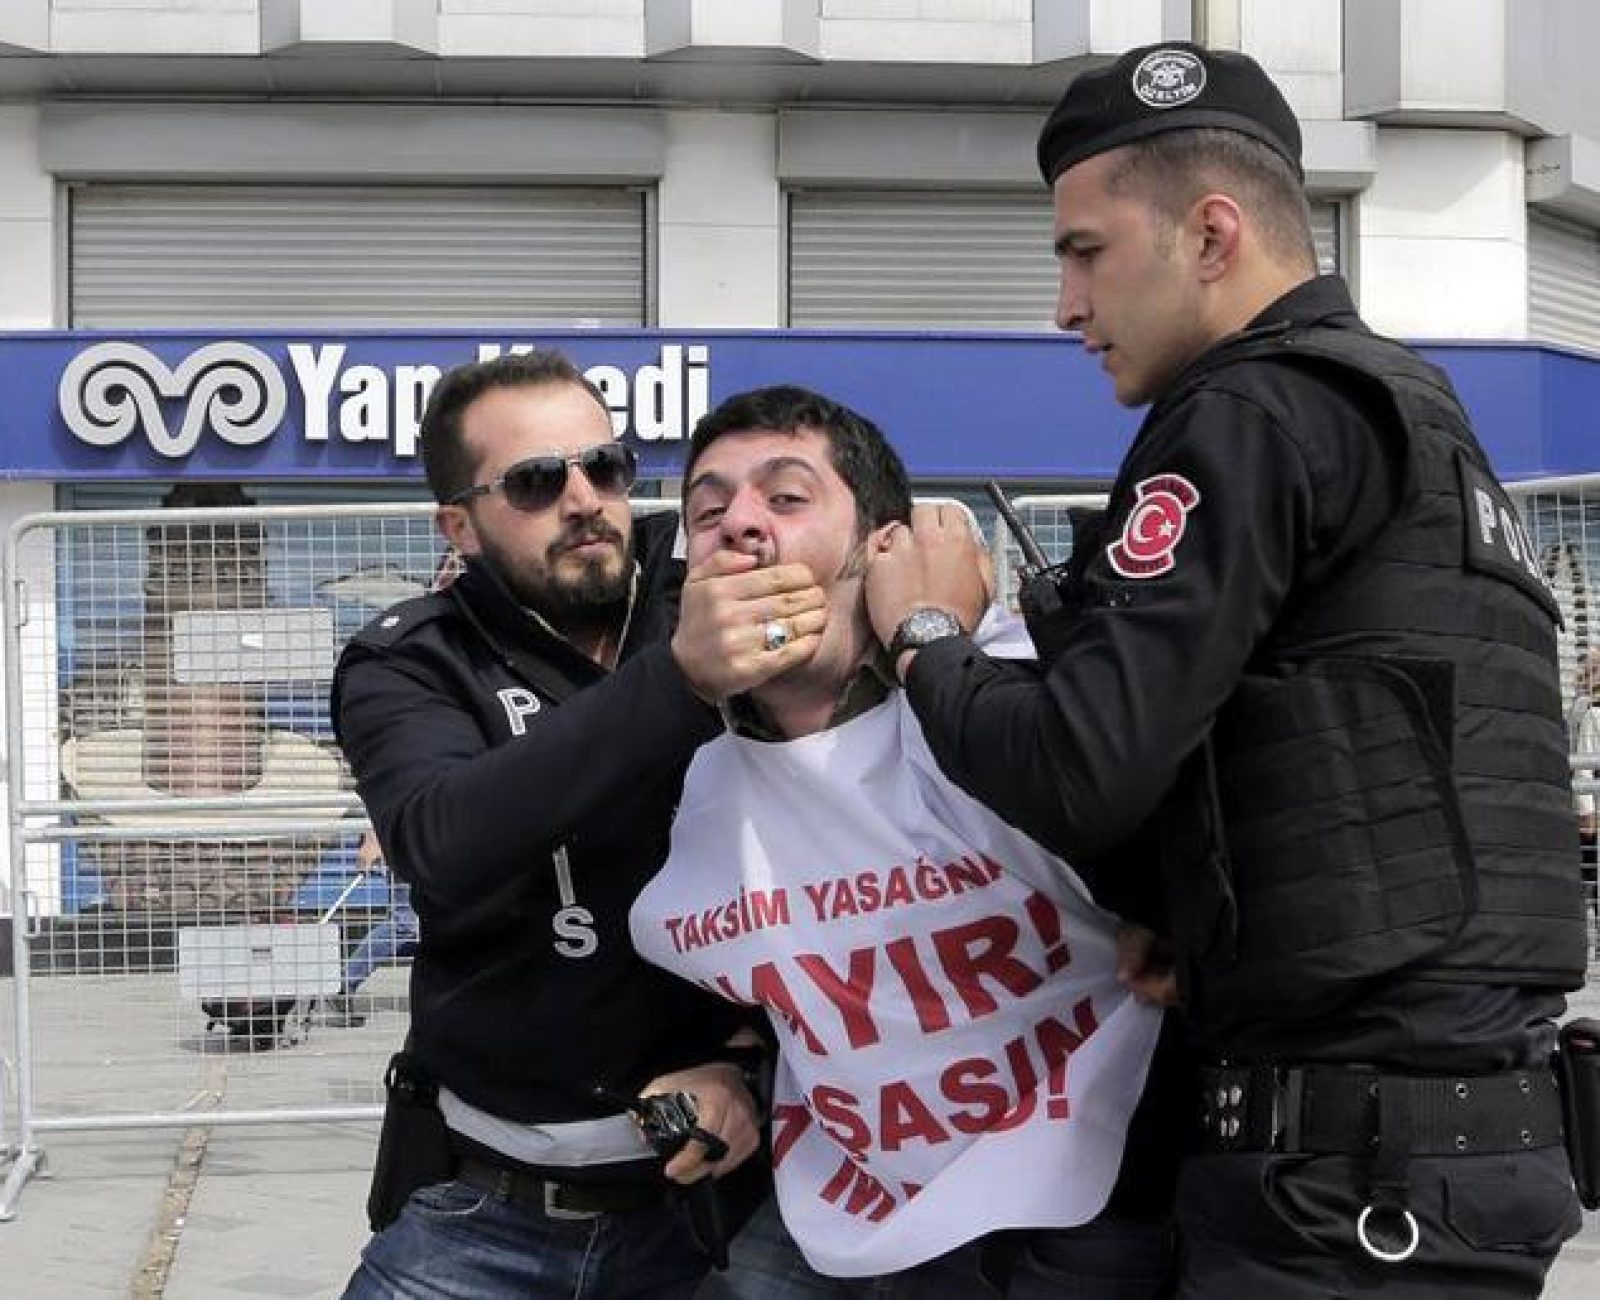 epa05938280 Turkish riot police arrest a protester who tried to reach Taksim Square for a May Day celebration, in Istanbul, Turkey, 01 May 2017. According to reports, Turkish police imposed tight security measures around Taksim Square after interior ministry denied permits for celebrations to mark Labors Day in the square. Labour Day or May Day is observed all over the world on the first day of the May to celebrate the economic and social achievements of workers and fight for labourers rights.  EPA/CEM TURKEL